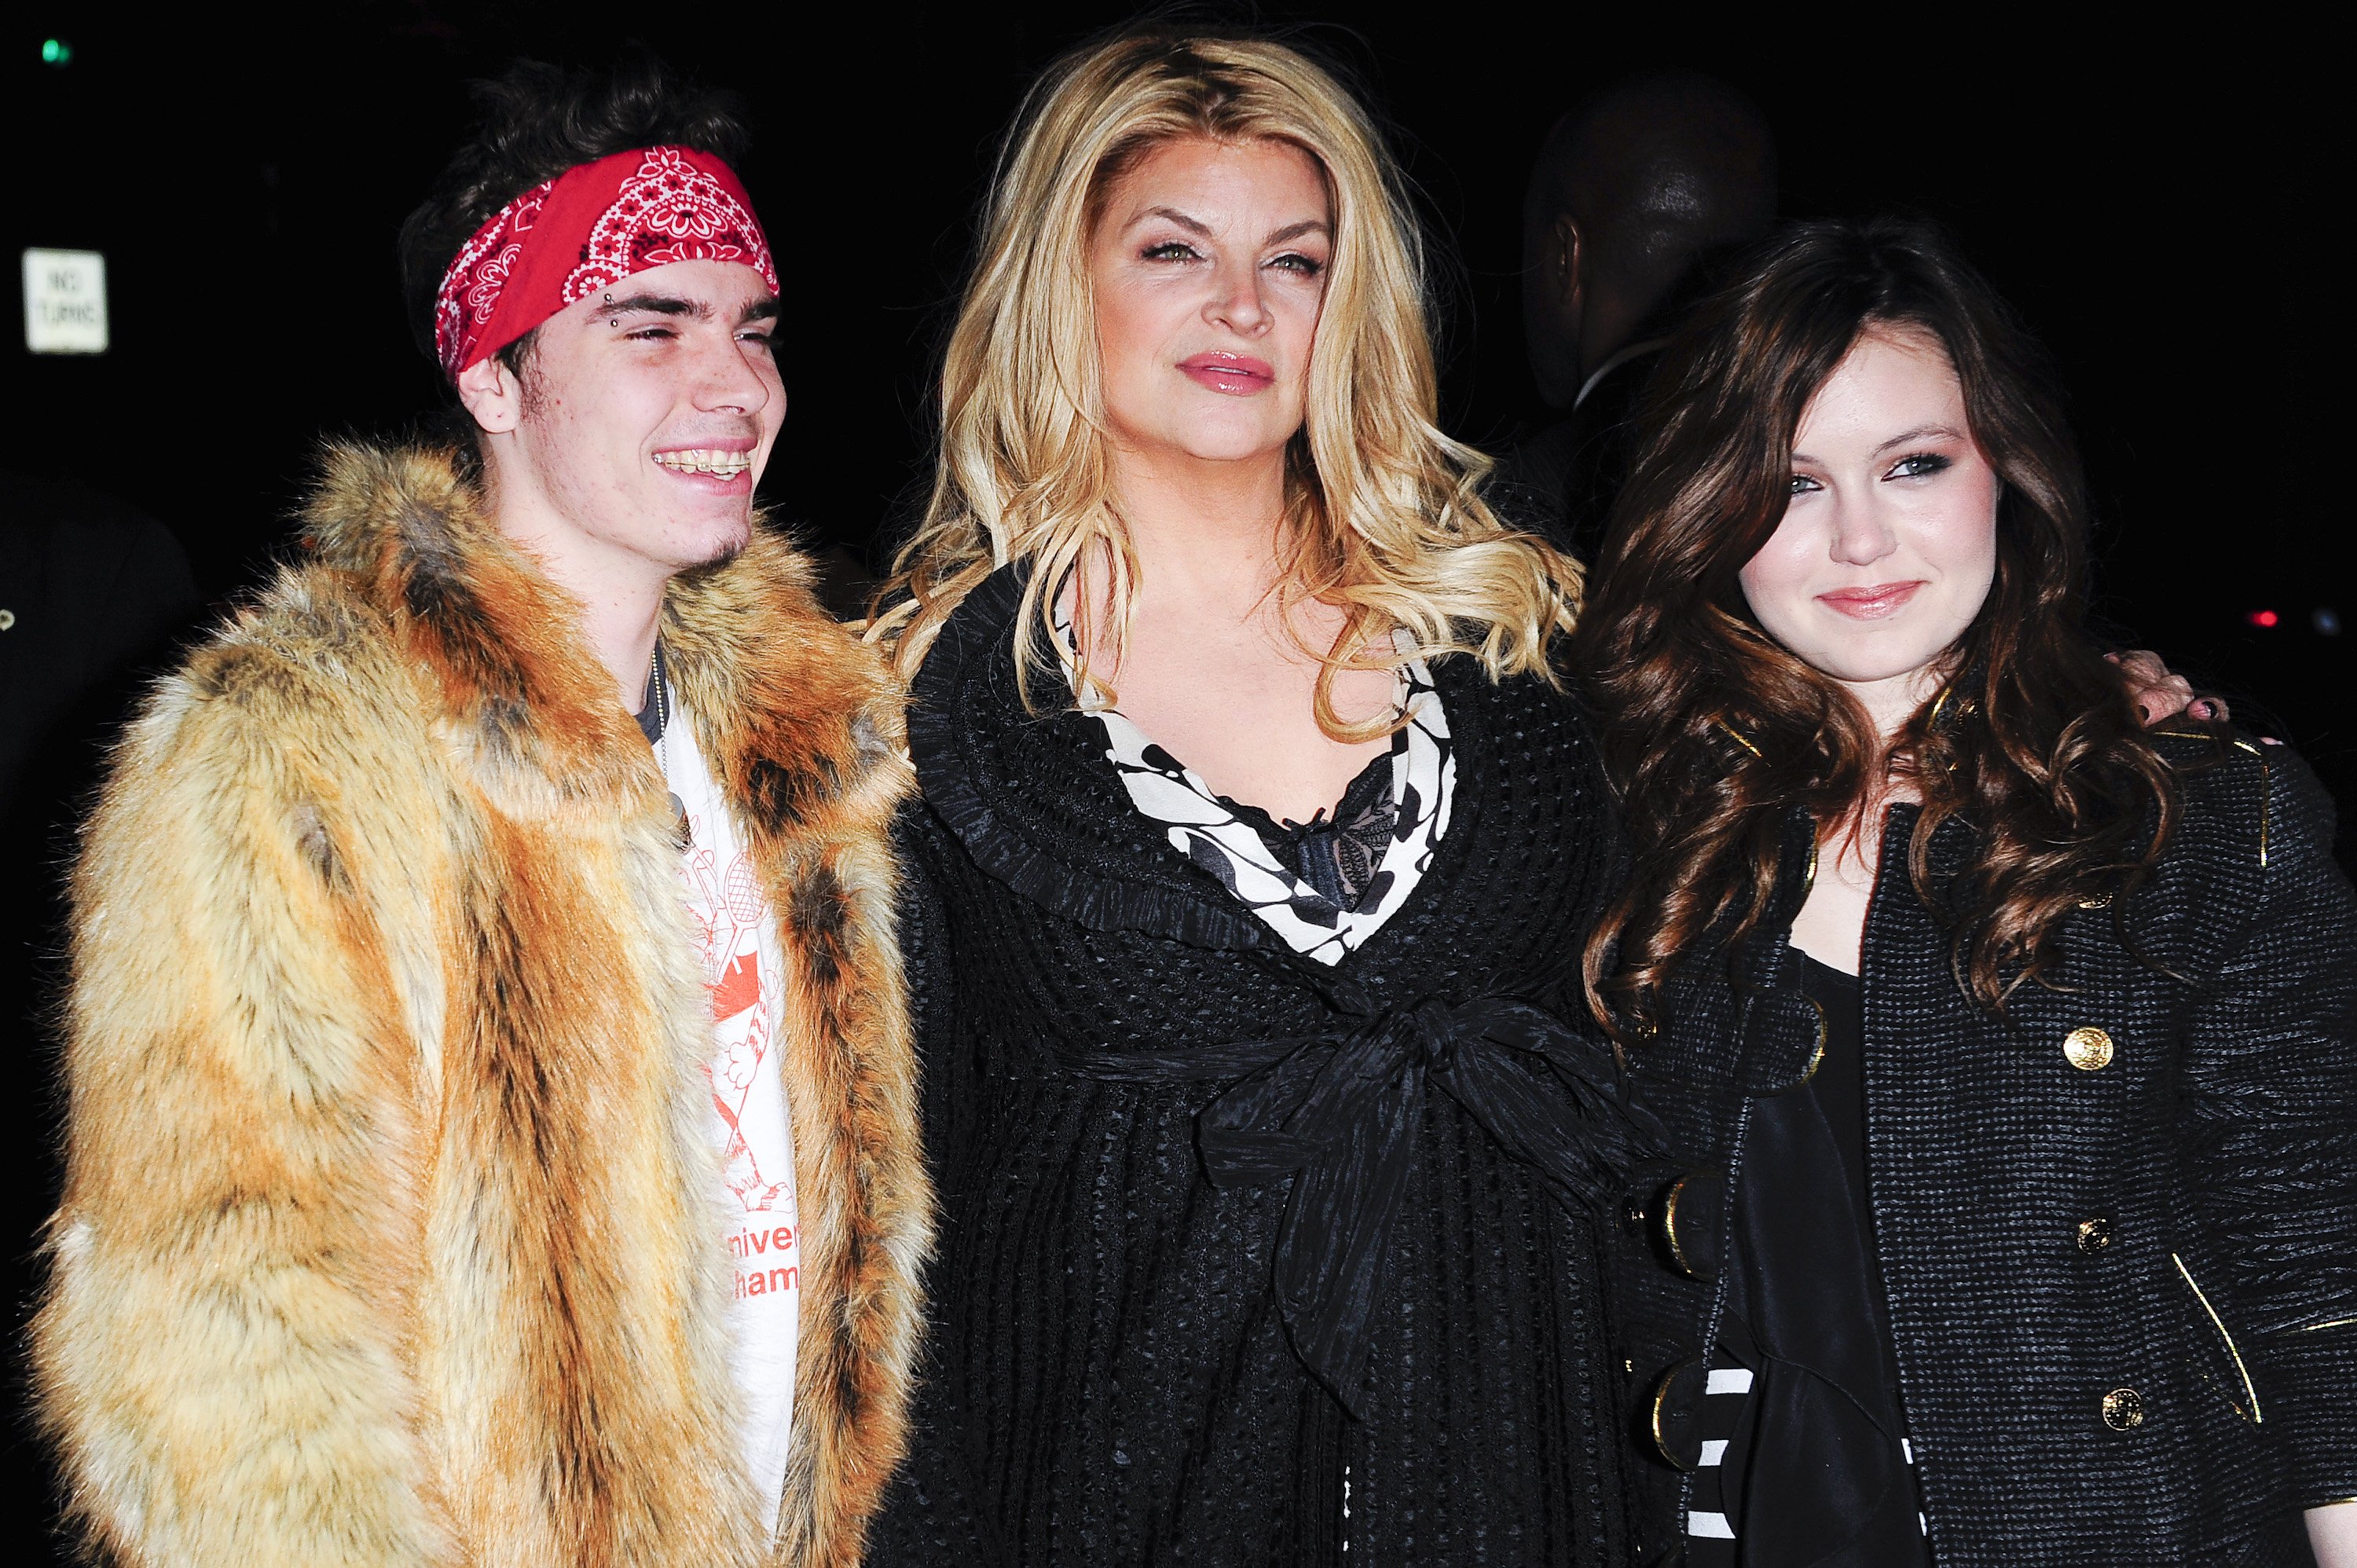 Kirstie Alley (C) and her children attend "The Runaways" premiere at the Landmark Sunshine Cinema on March 17, 2010 in New York City. | Source: Getty Images